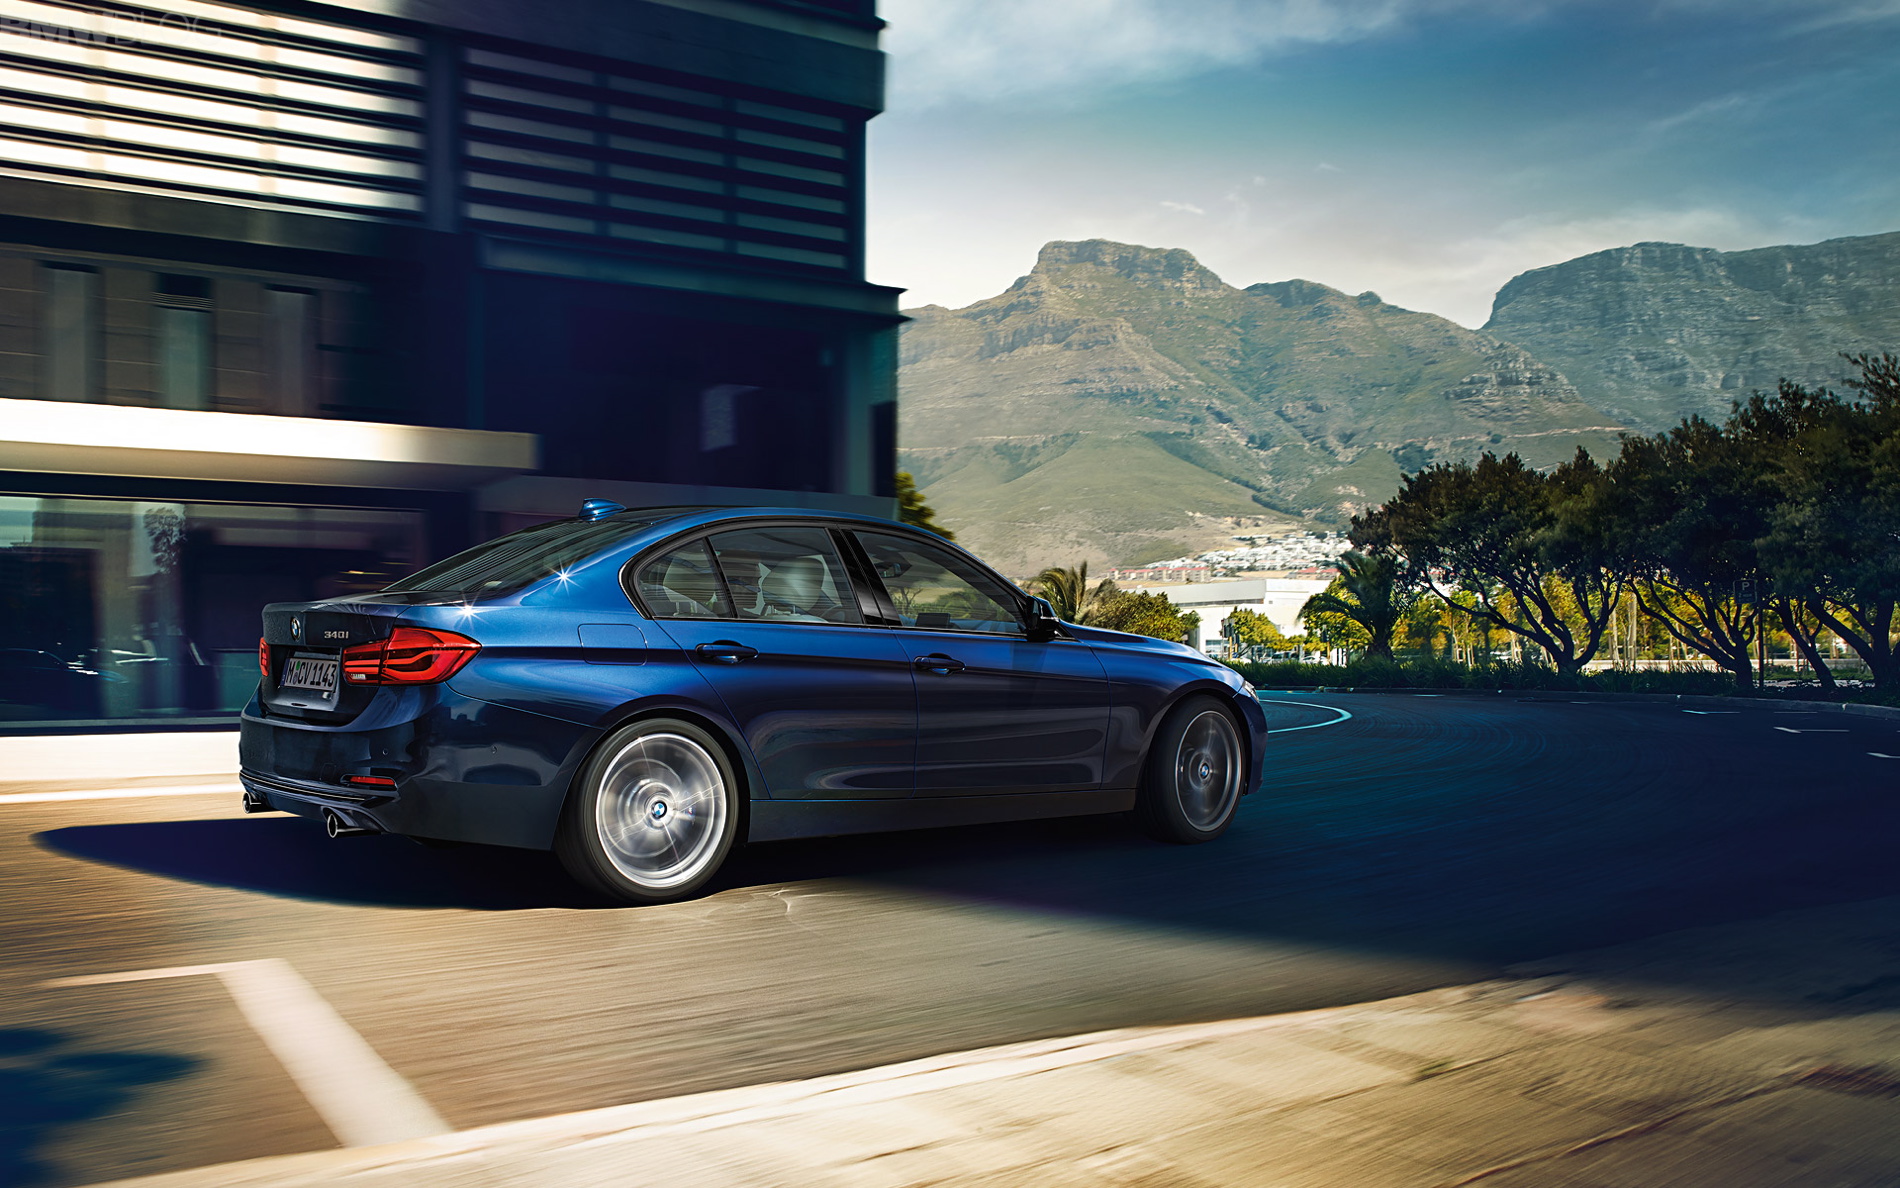 Wallpapers - 2015 BMW 3 Series Facelift